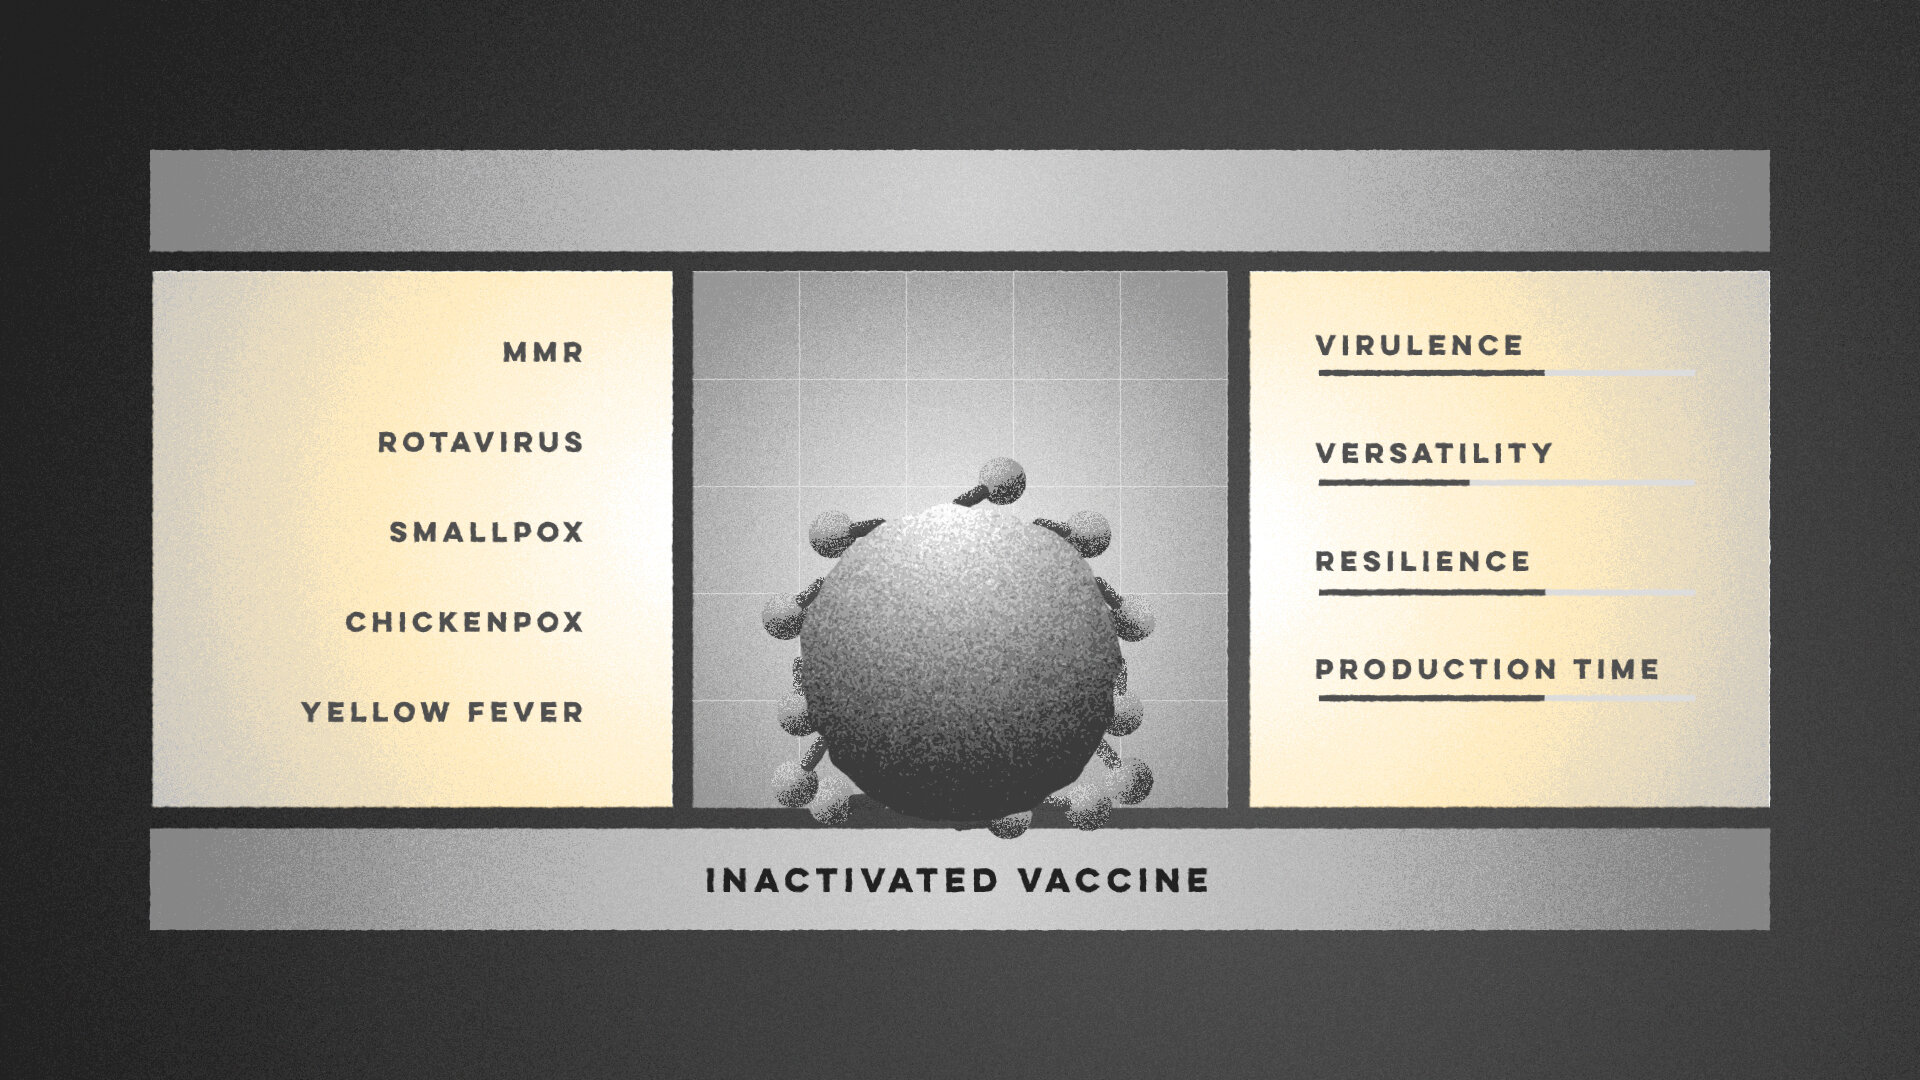 TED_Vaccines_14_InactivatedVaccine.jpg